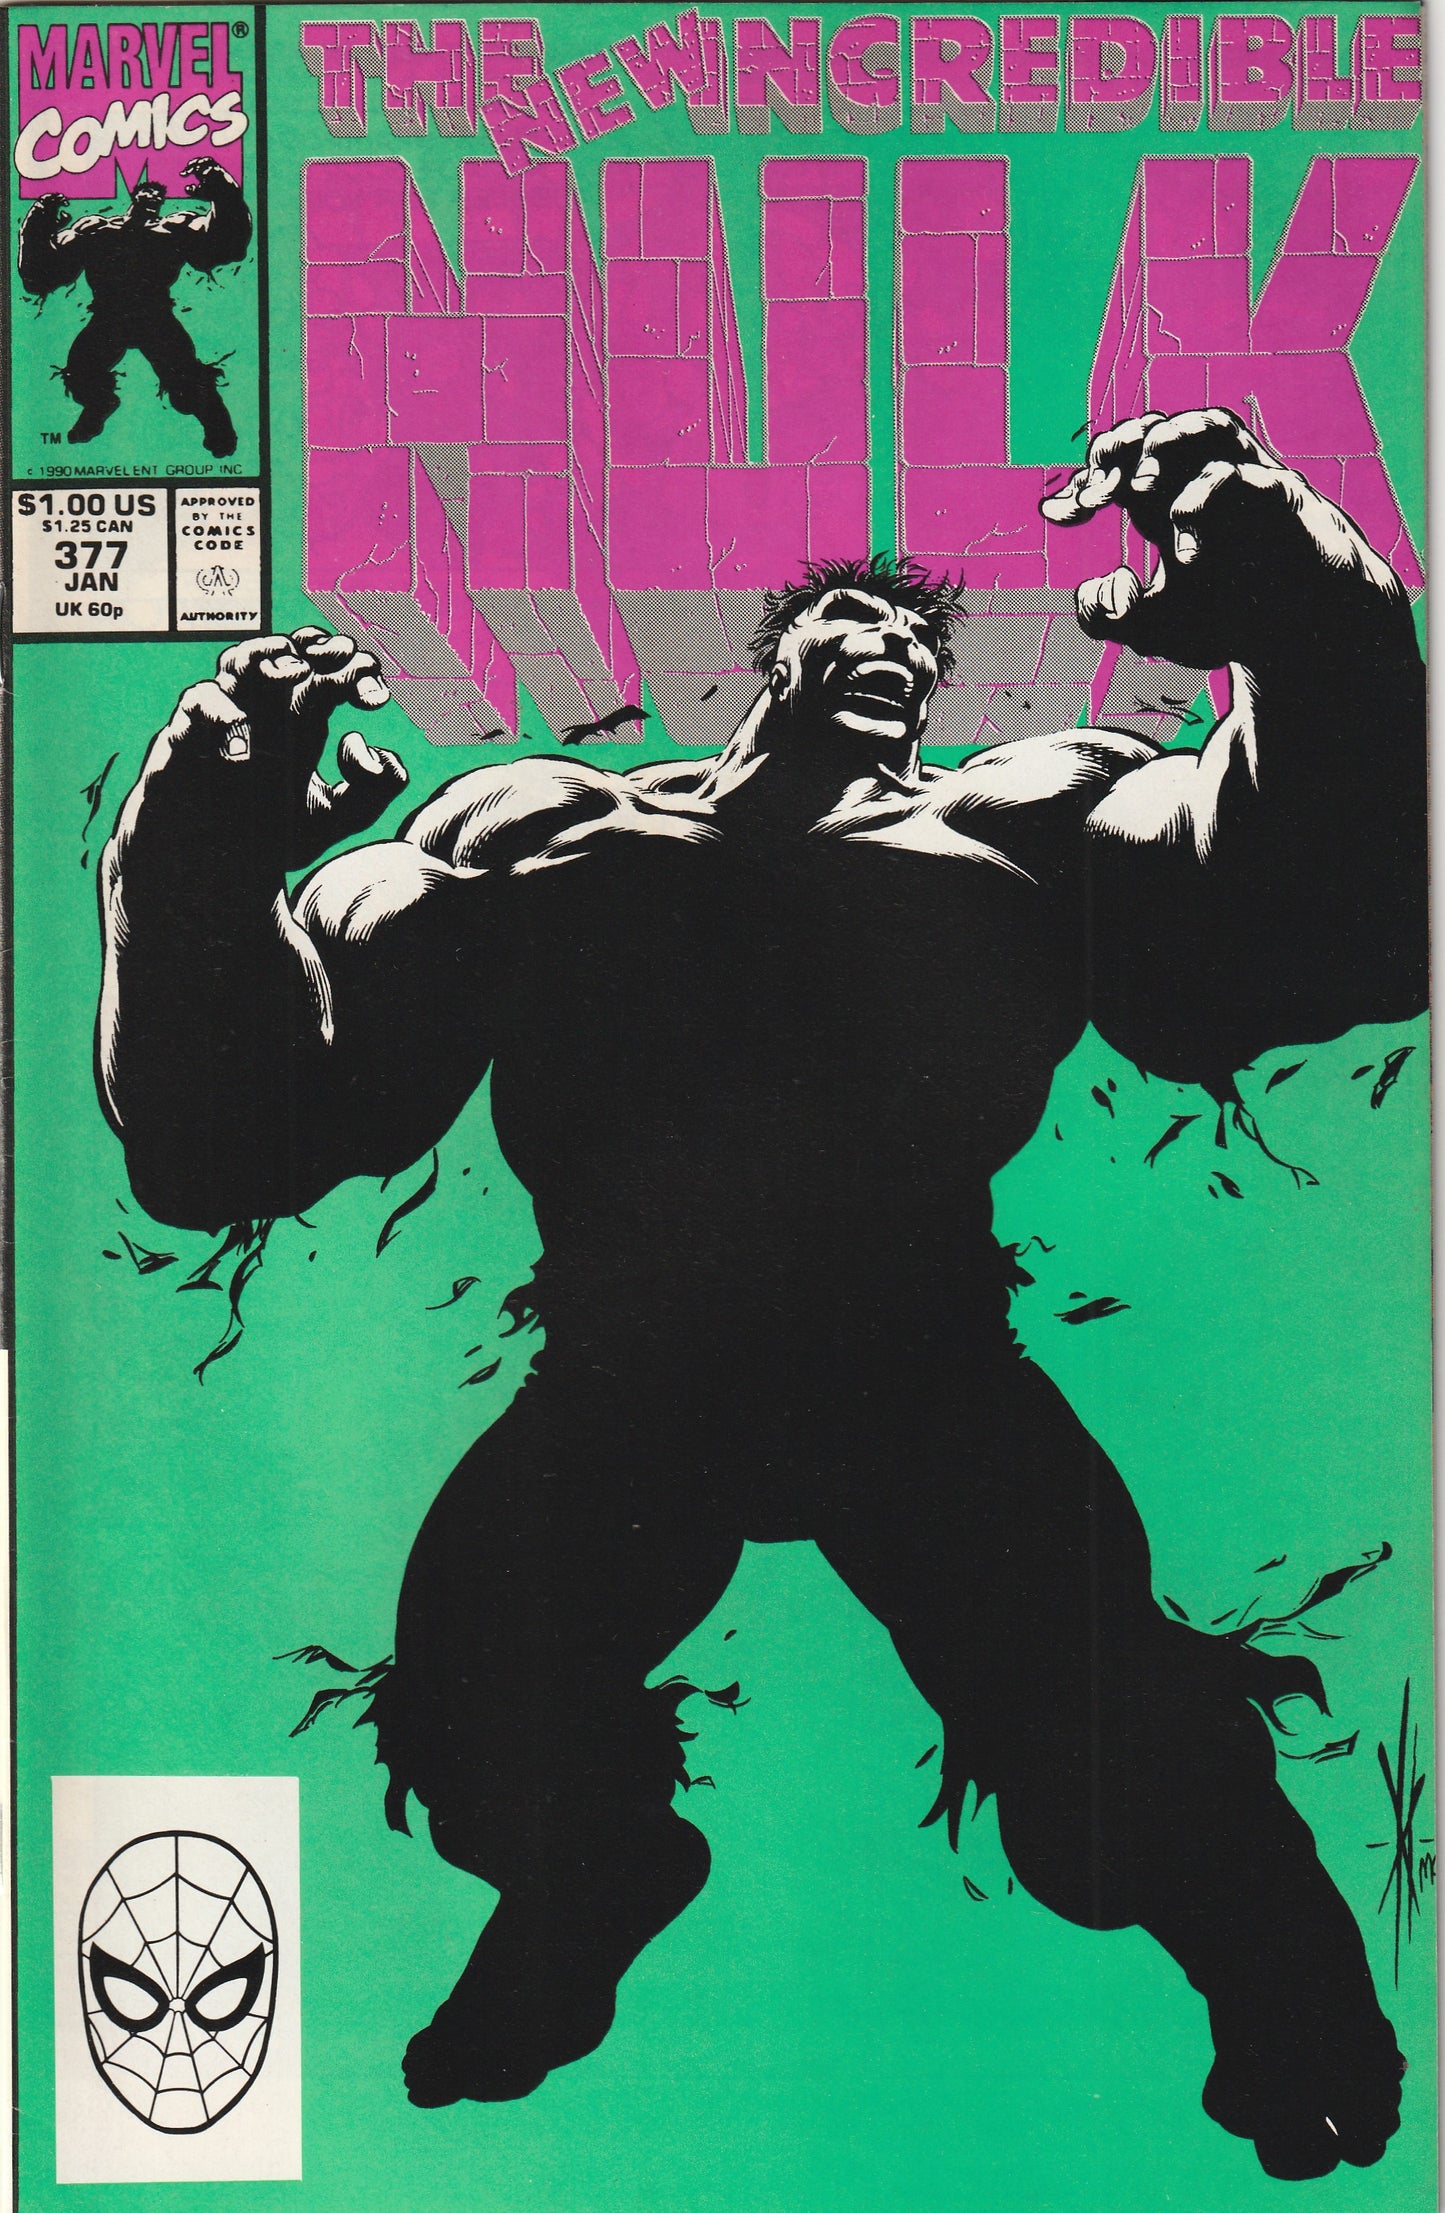 Incredible Hulk #377 (1991) - 1st Appearance of the Professor Hulk and Guilt Hulk - Direct edition